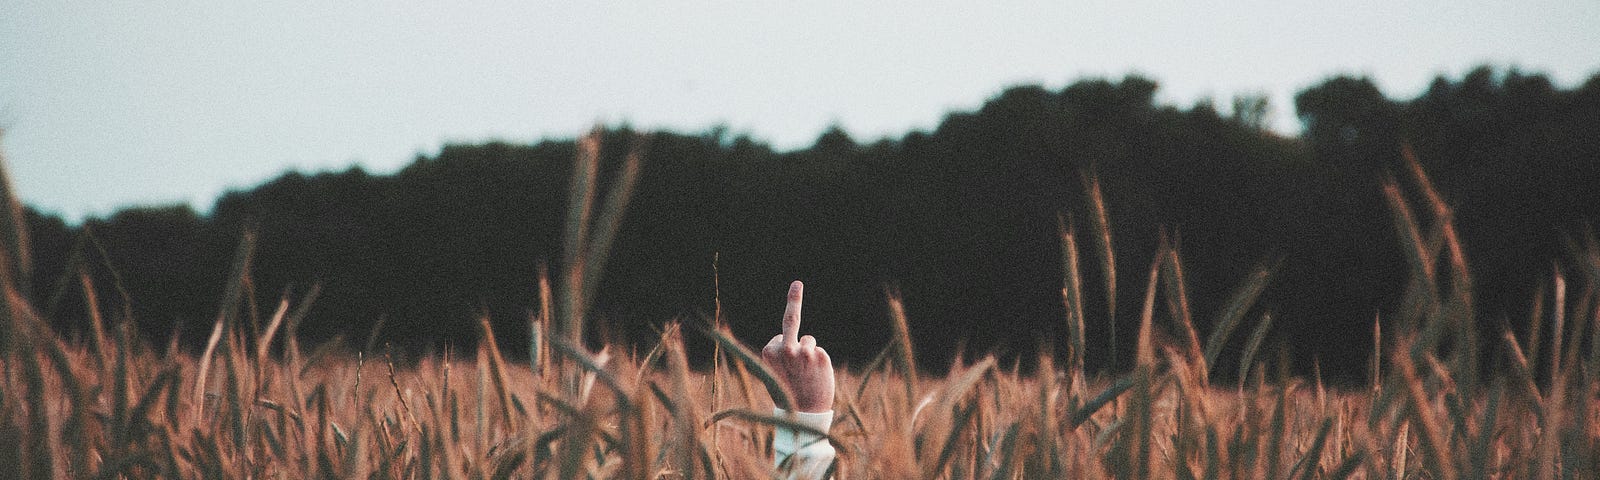 Photo of a person hidden beneath talls wheat grasses in a vast field, with a sleeved middle finger standing tall.